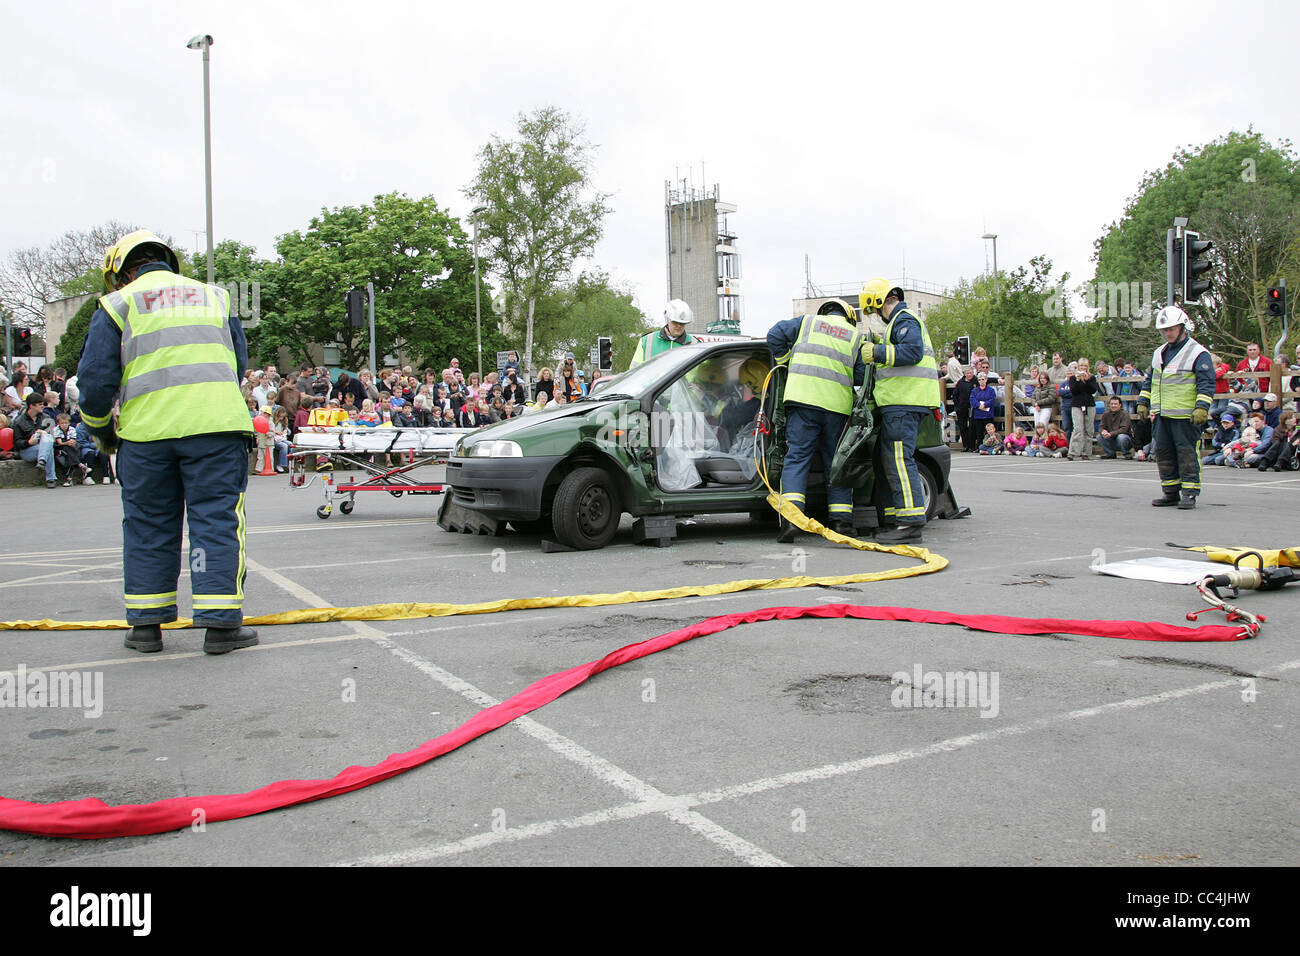 Fire Services Freeing Passengers from Wrecked Vehicle - Public Demonstration Stock Photo